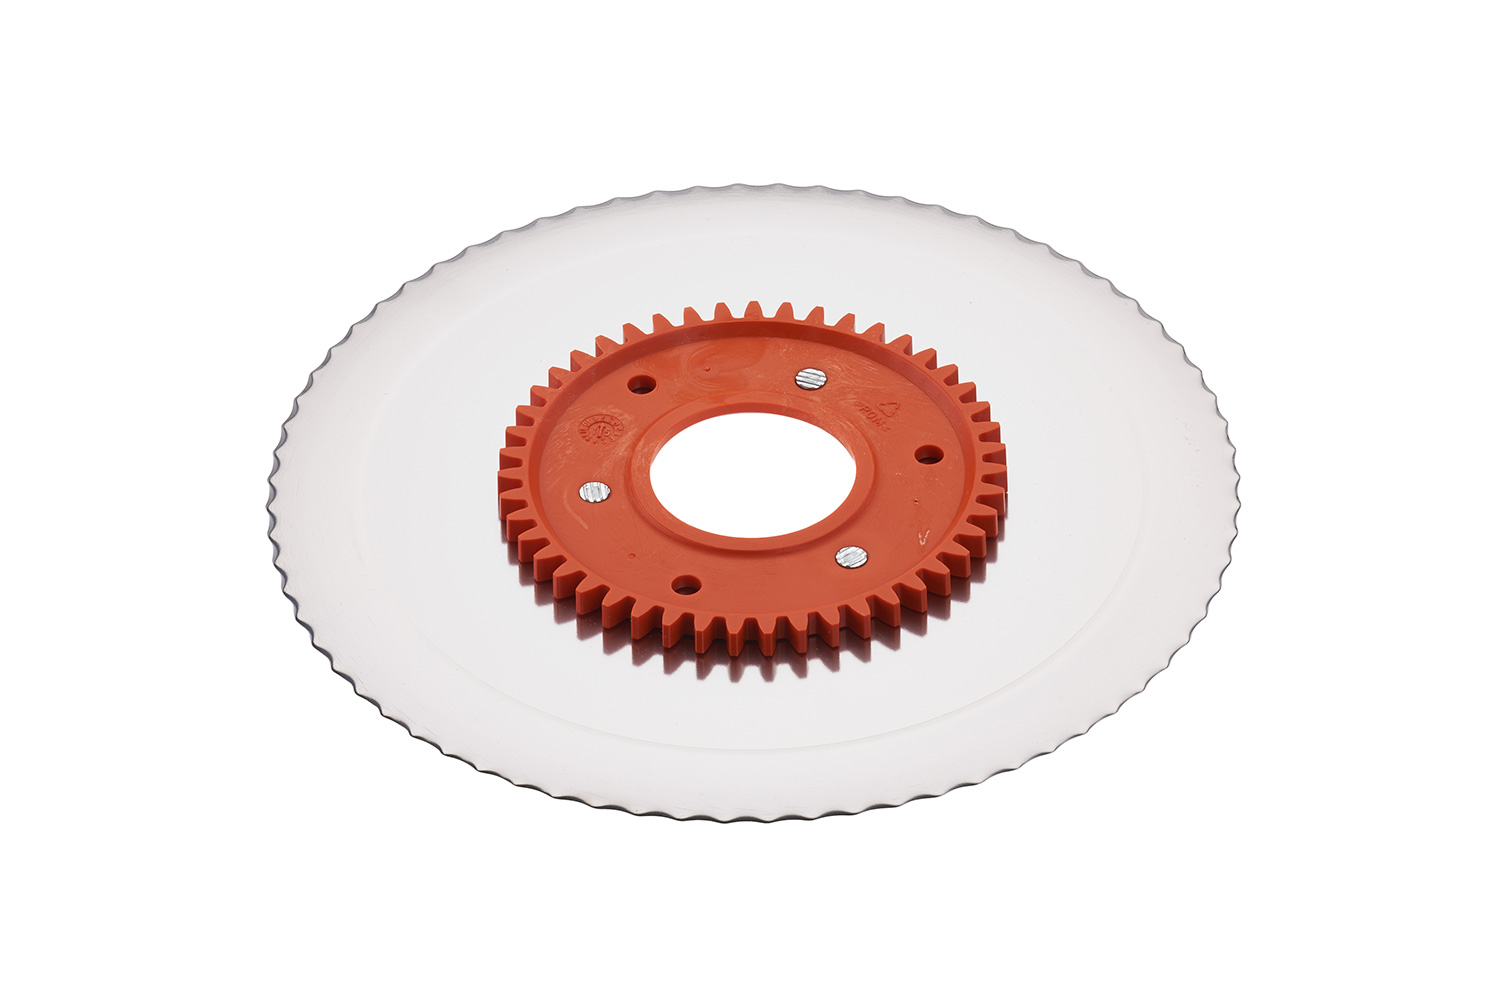 Serrated circular blade with electropolished surface and an orange gear